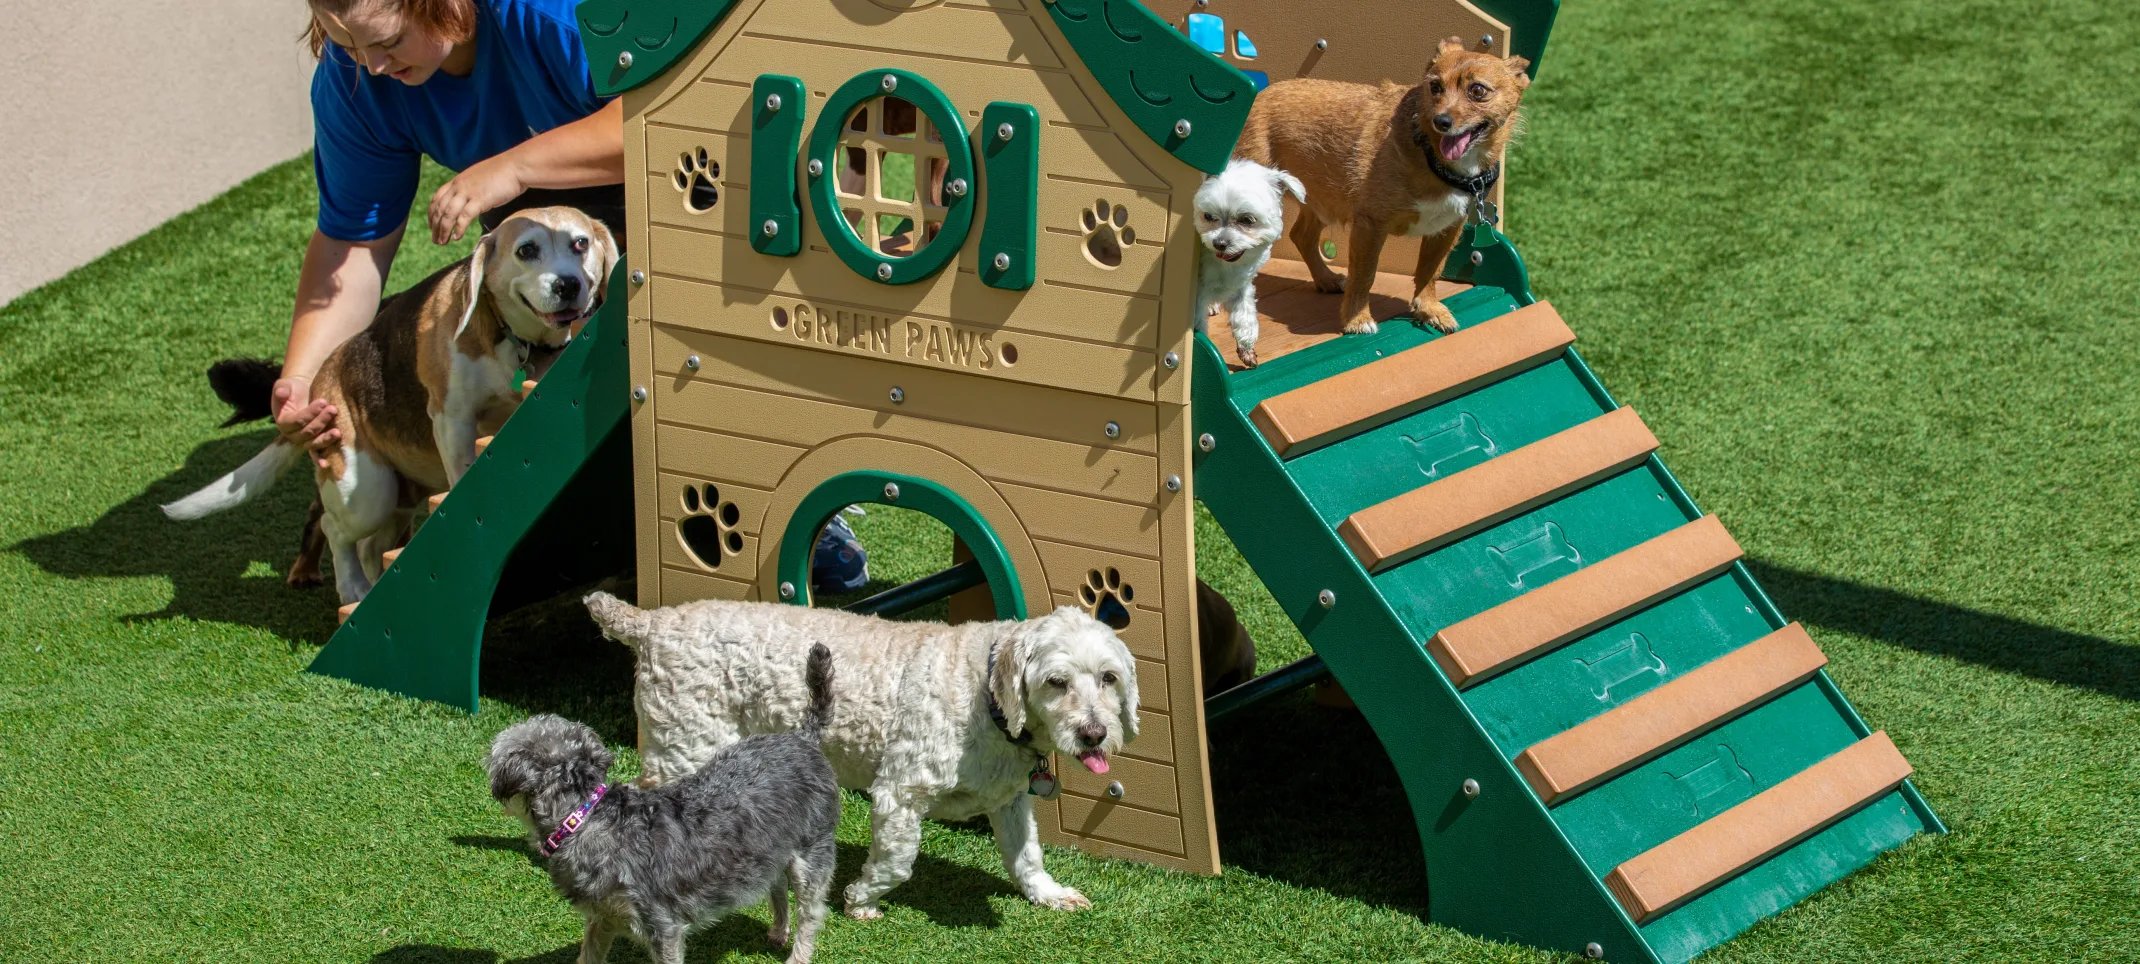 Dogs Playing on Play Area